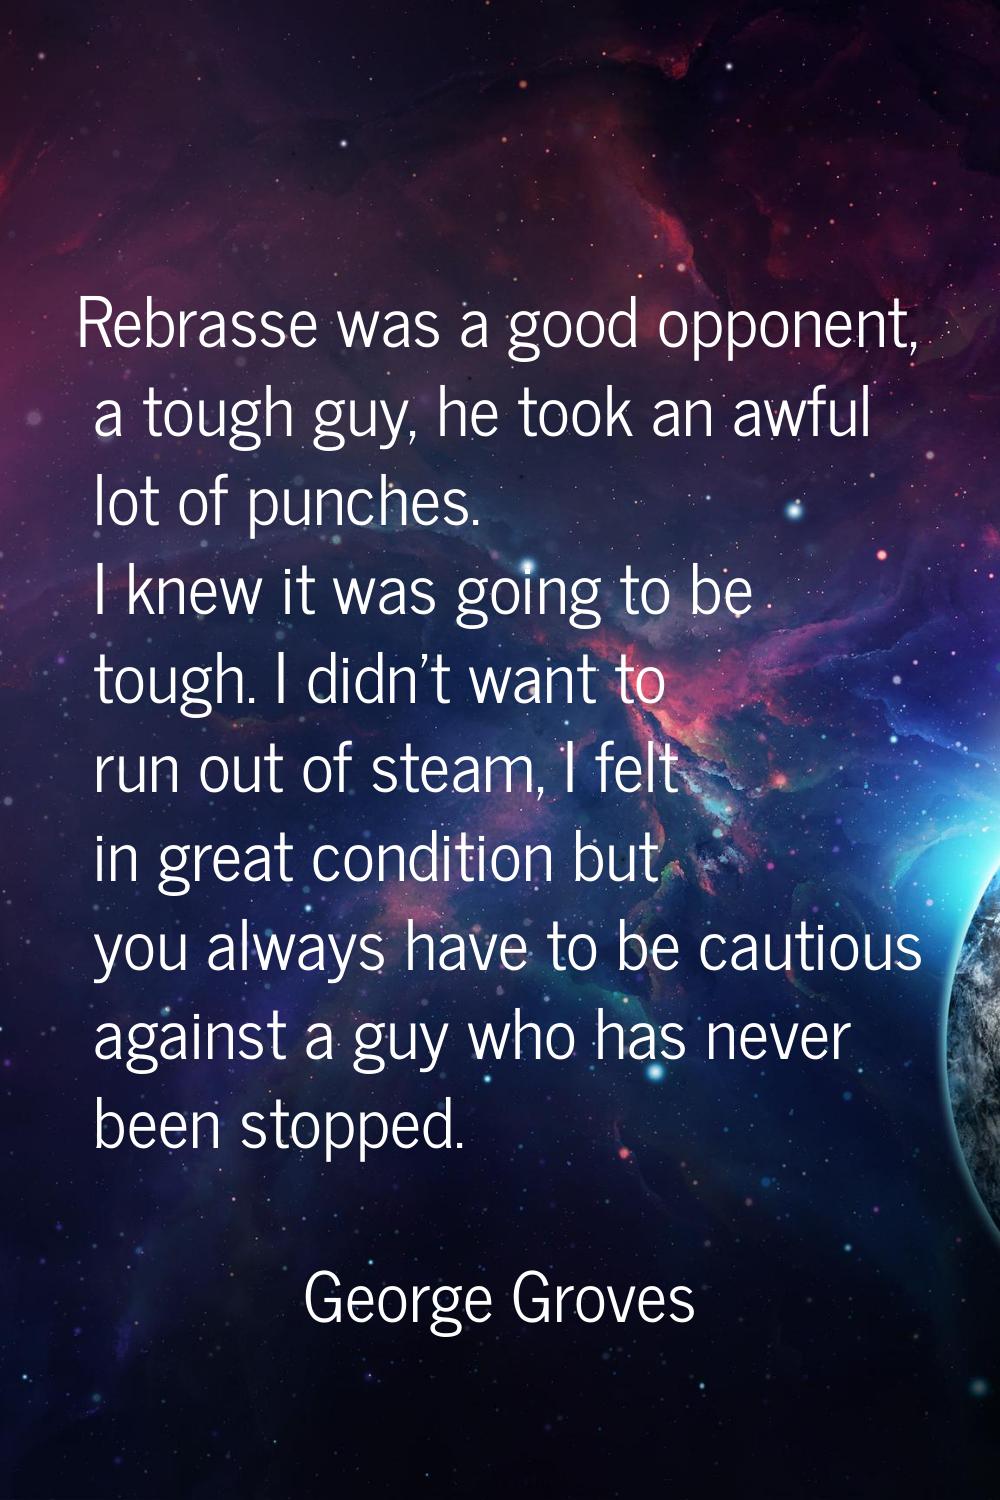 Rebrasse was a good opponent, a tough guy, he took an awful lot of punches. I knew it was going to 